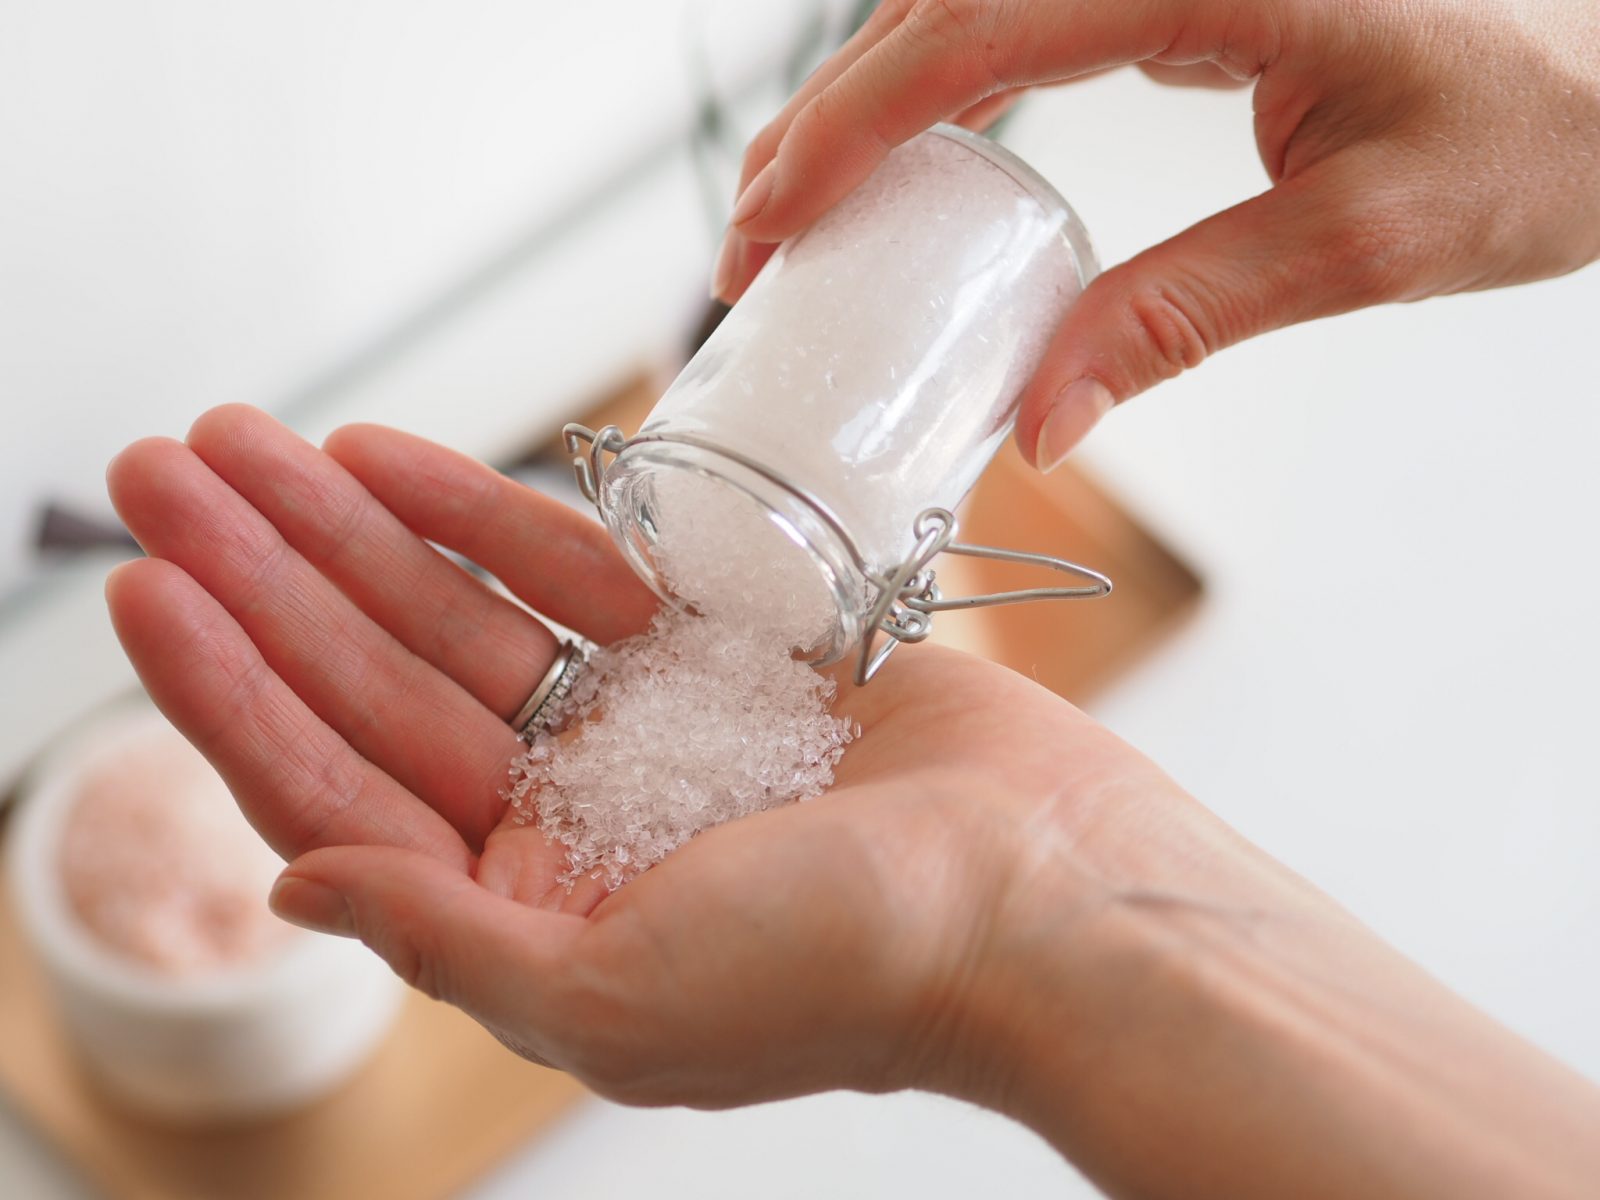 Bath salts to revive and recover | I test four favourites to tell you mine